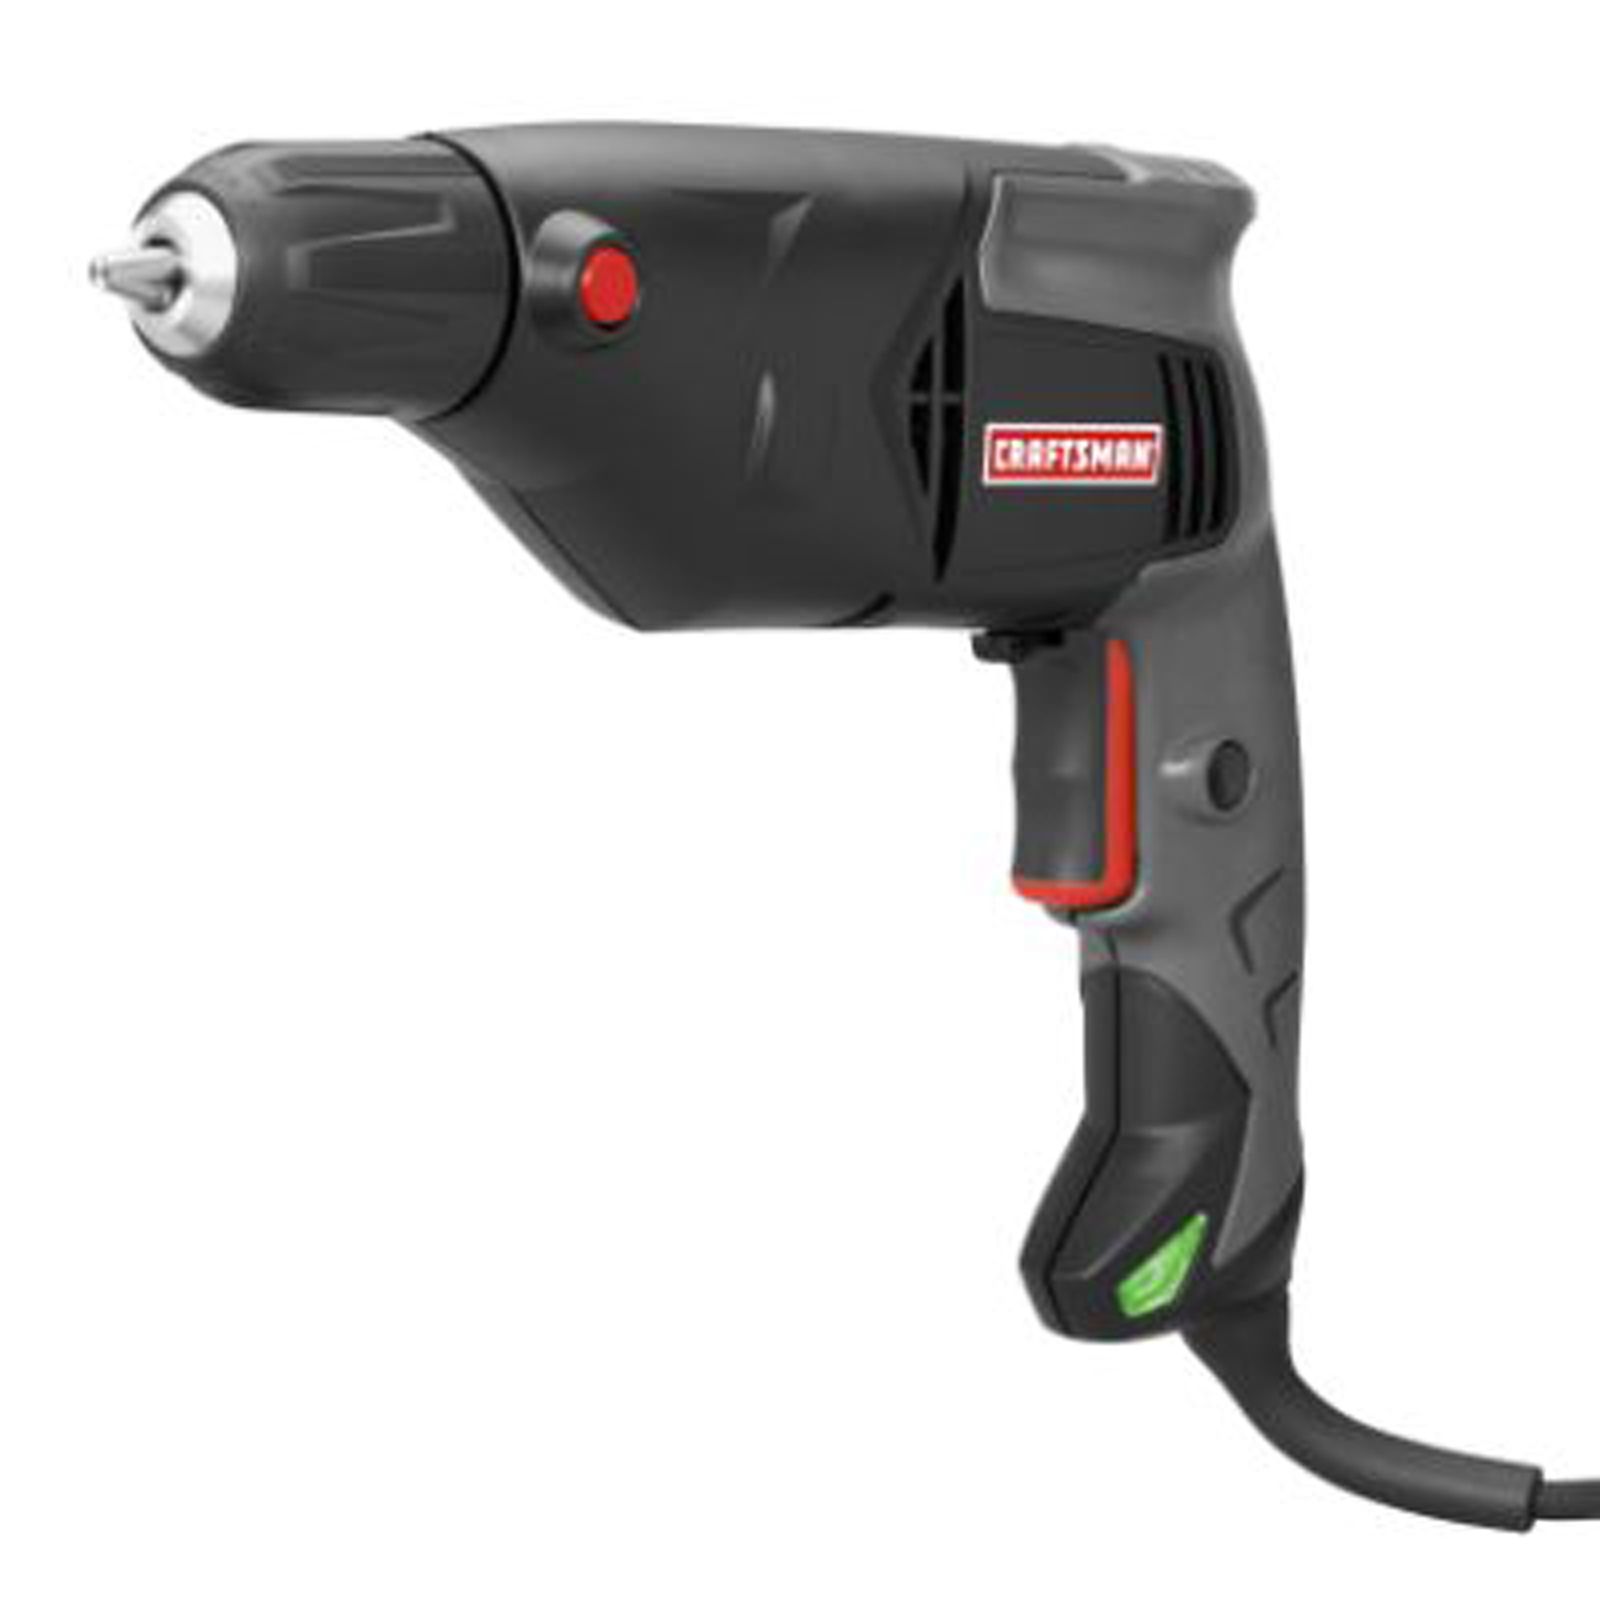 Craftsman 3/8 in Corded Drill